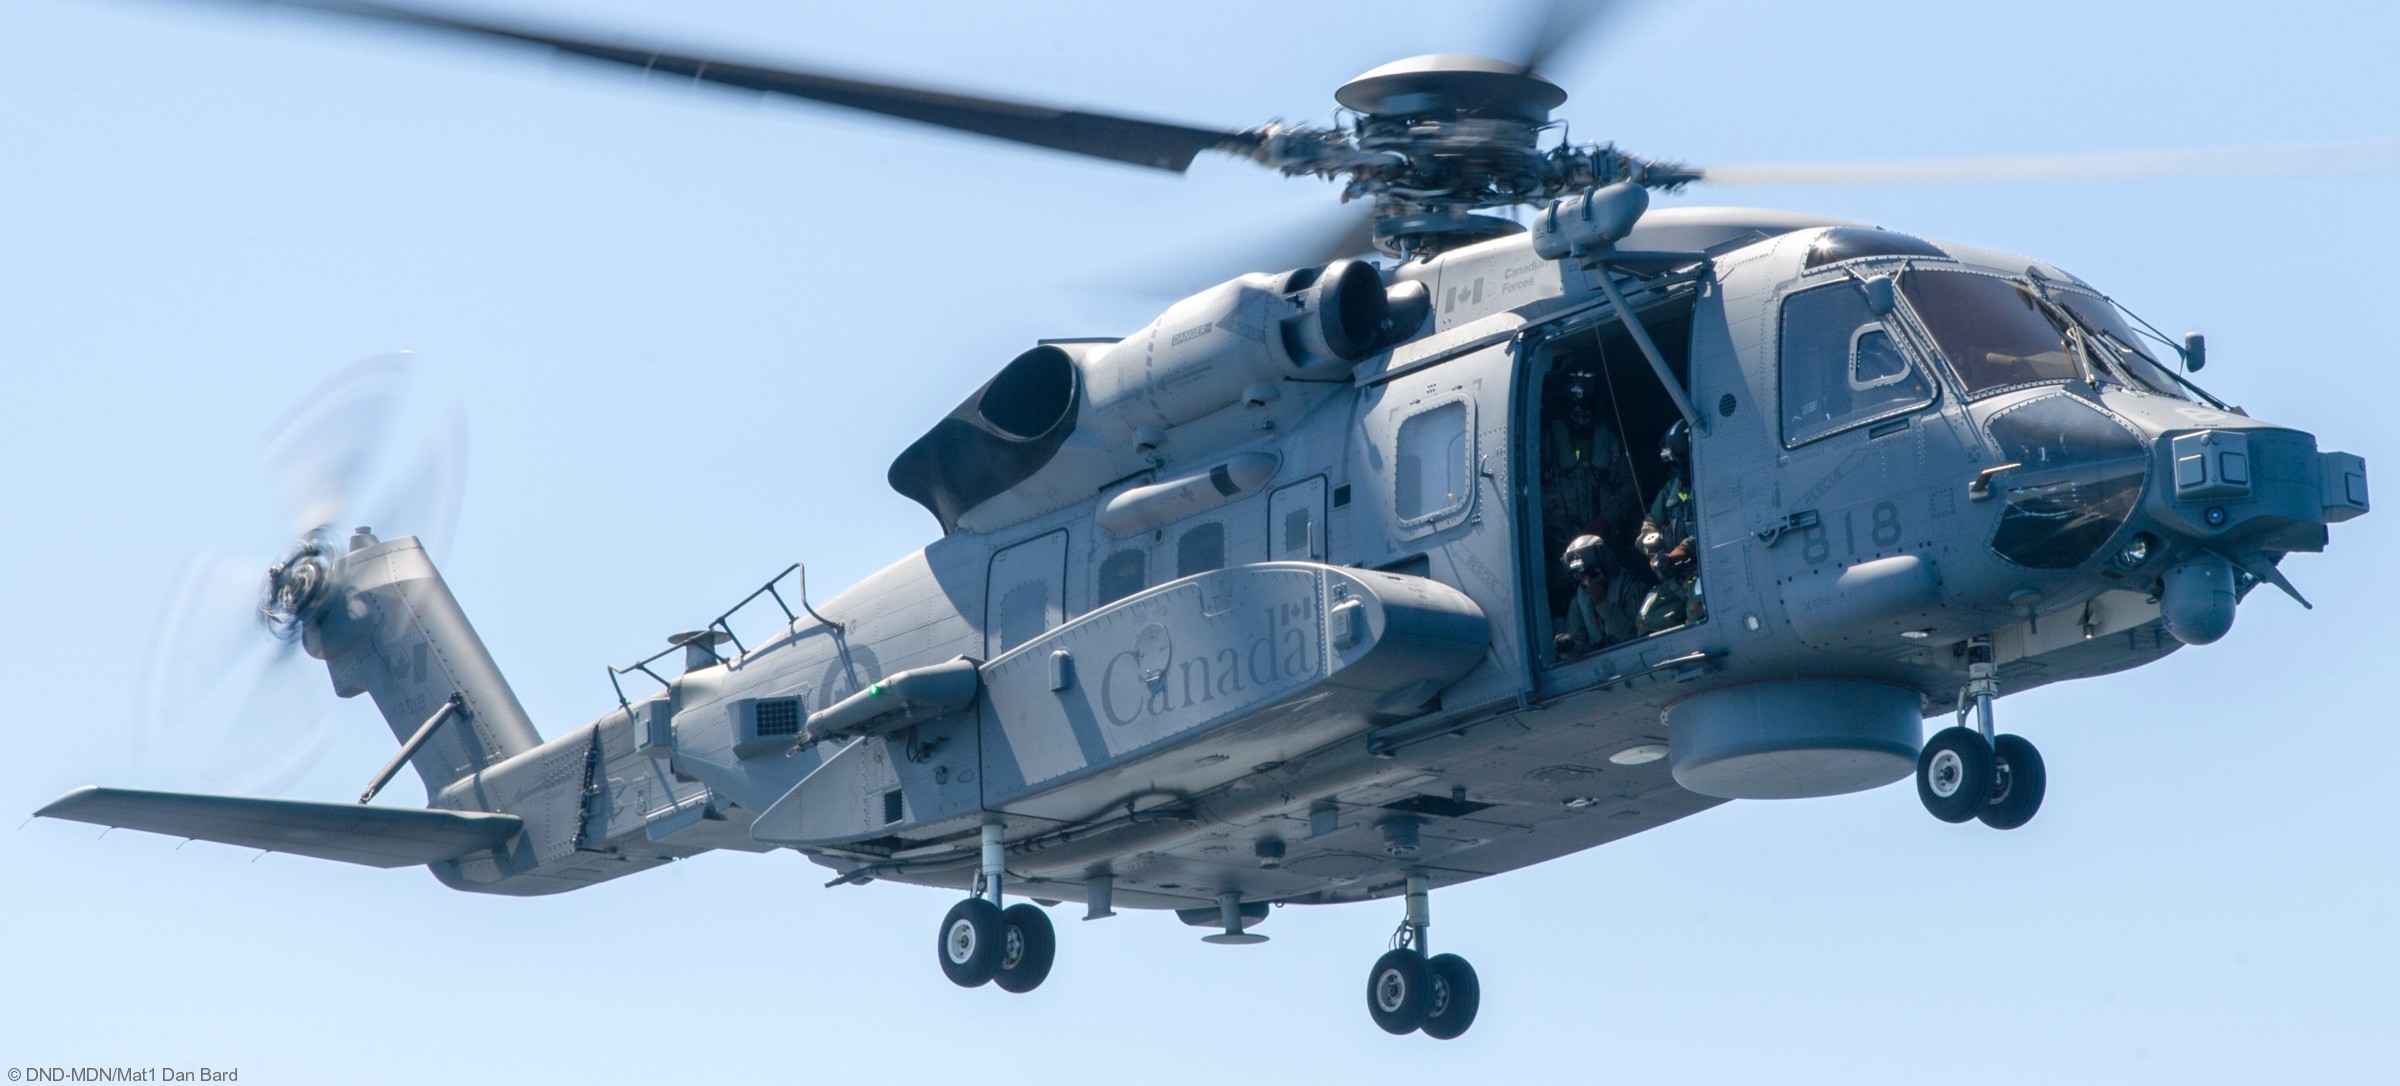 ch-148 cyclone naval helicopter royal canadian air force navy rcaf sikorsky hmcs 406 423 443 maritime squadron 26